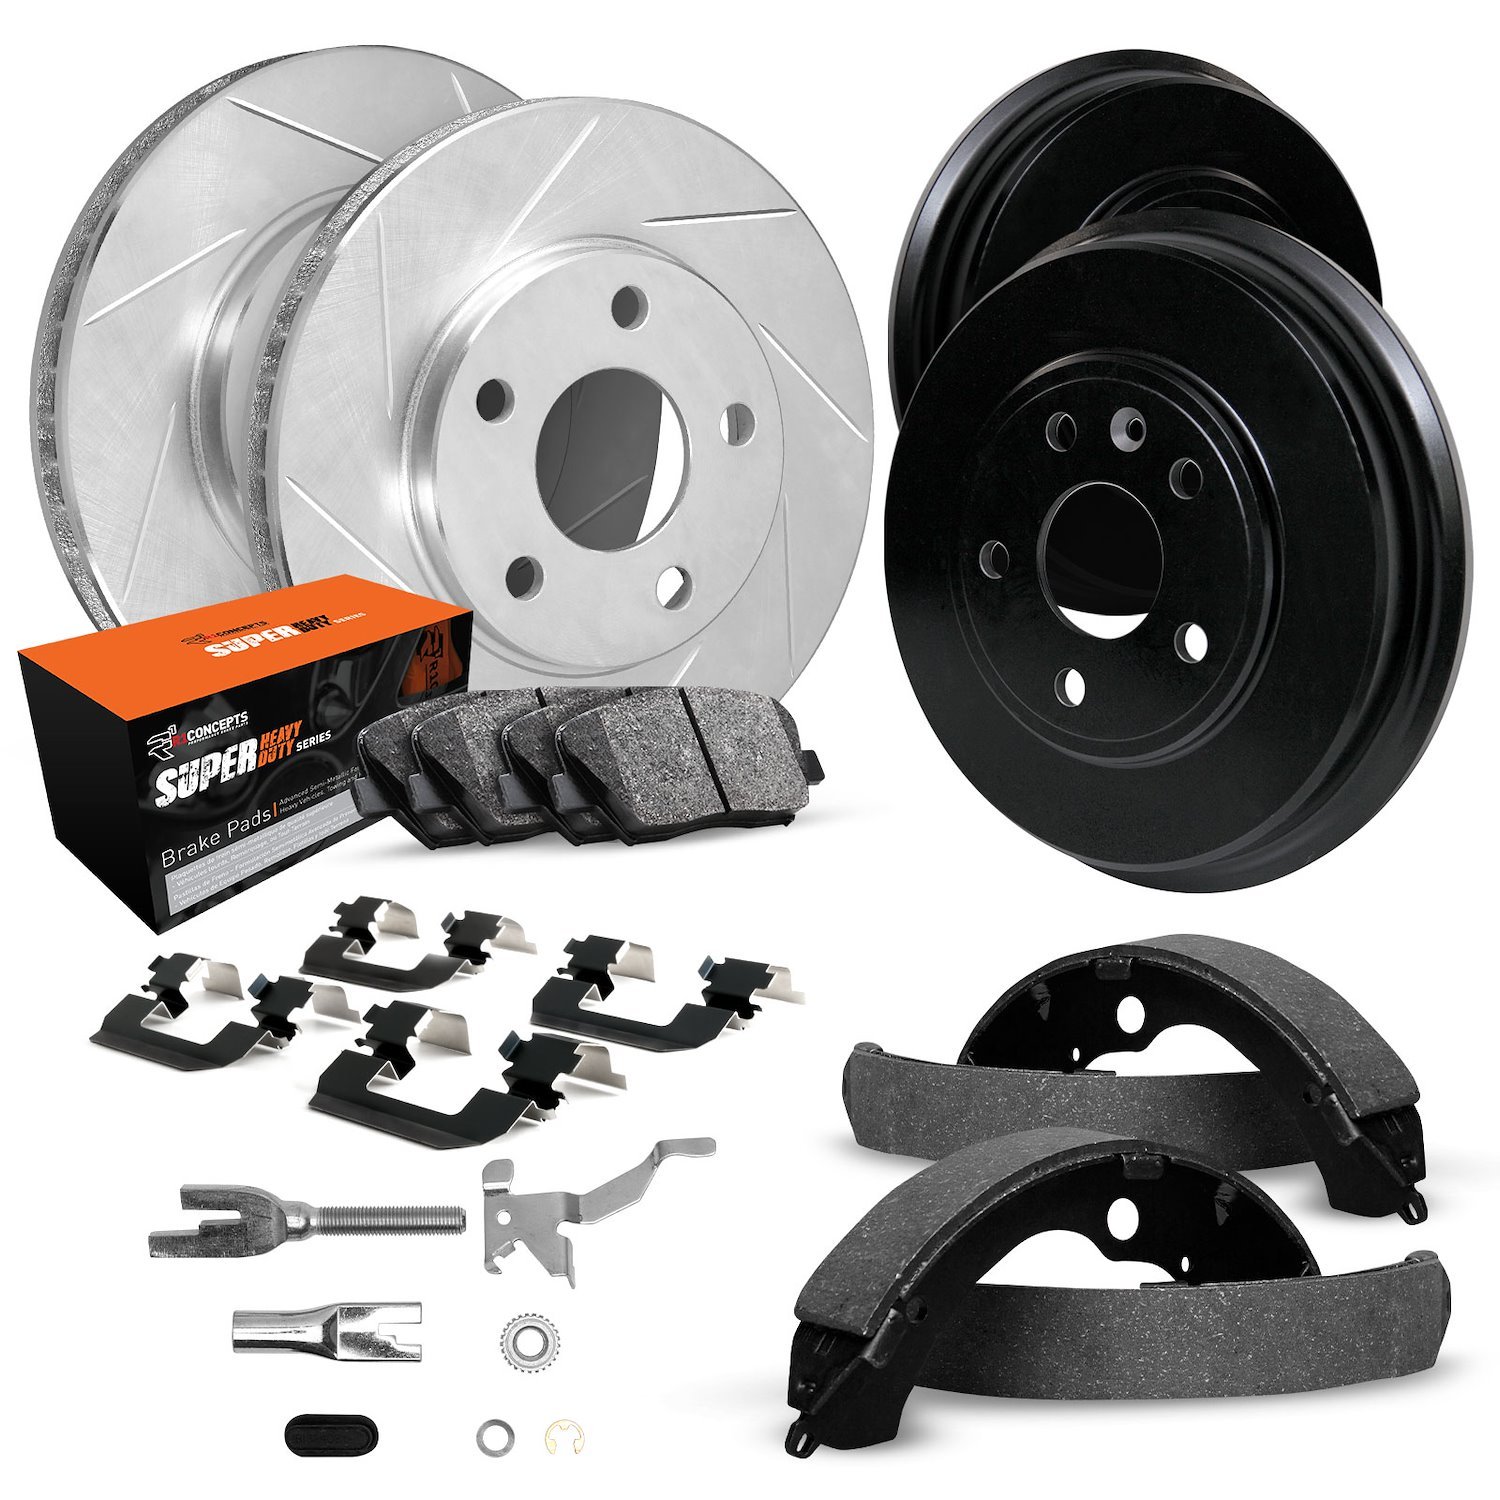 E-Line Slotted Silver Rotor & Drum Set w/Super-Duty Pads, Shoes/Hardware/Adjusters, 1997-2002 Ford/Lincoln/Mercury/Mazda